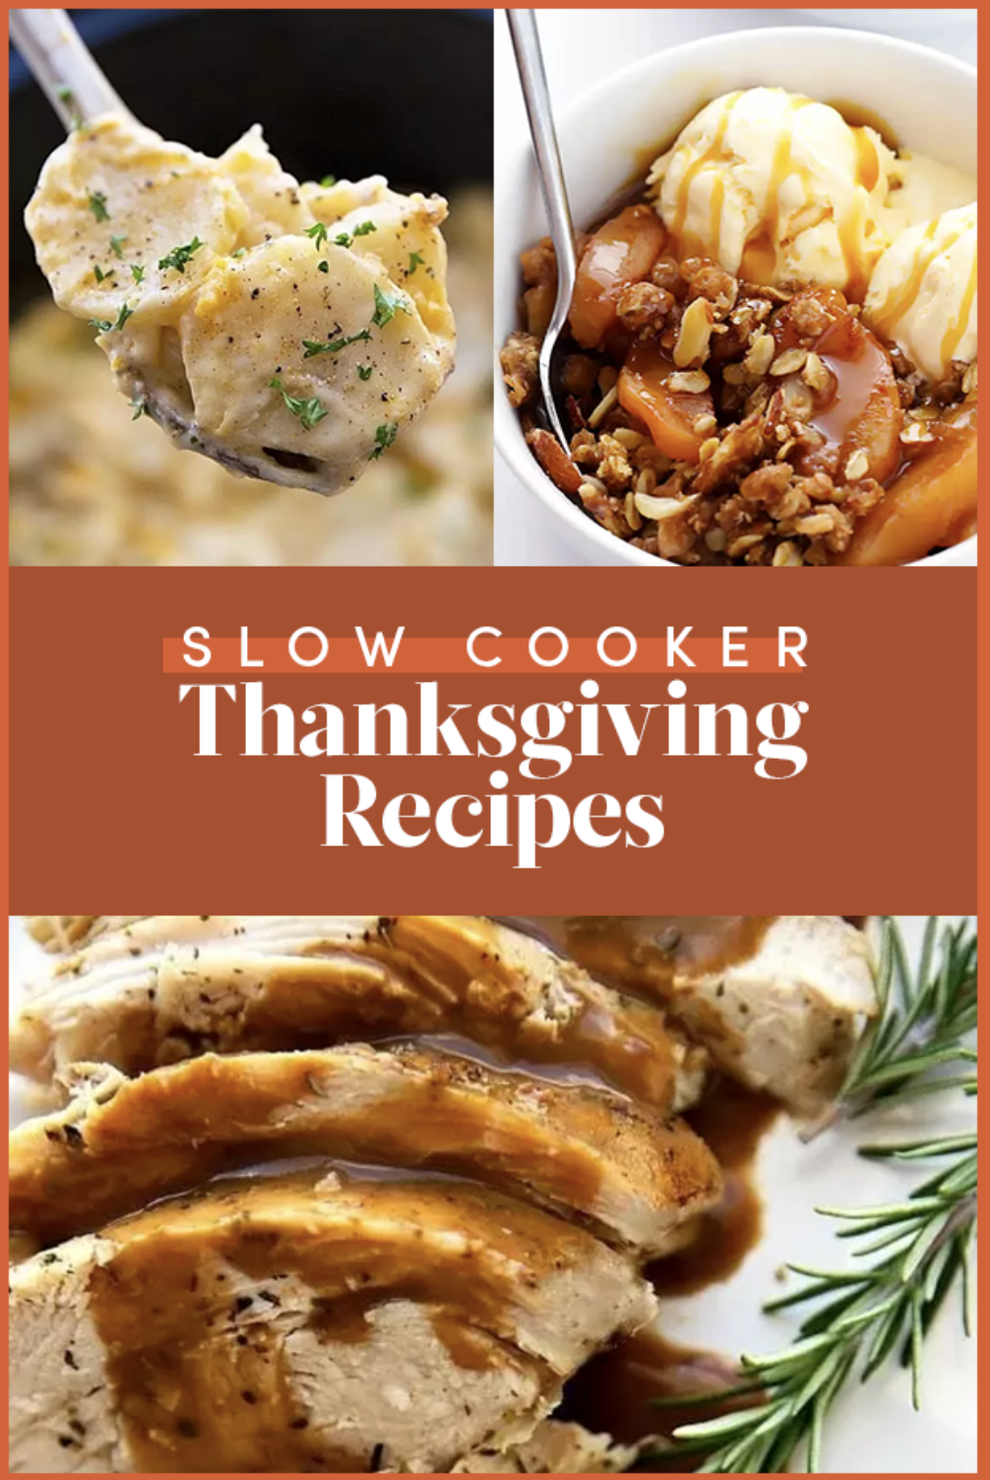 Thanksgiving Recipes: Appetizers, Main Dishes, Sides, Desserts, Drinks